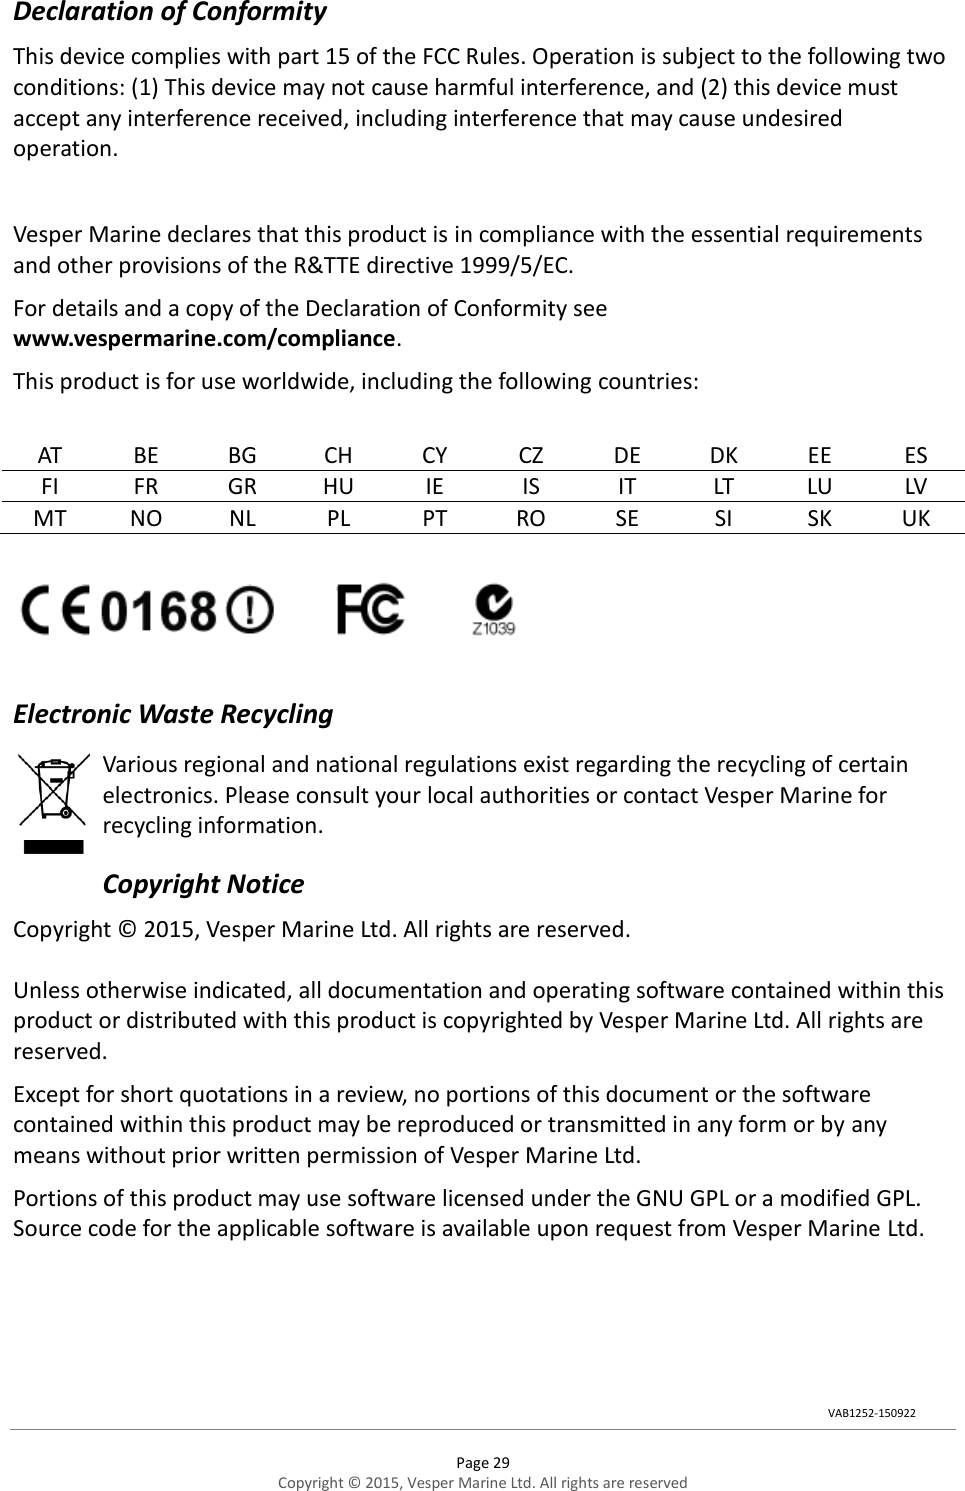  Page 29 Copyright © 2015, Vesper Marine Ltd. All rights are reserved  Declaration of Conformity This device complies with part 15 of the FCC Rules. Operation is subject to the following two conditions: (1) This device may not cause harmful interference, and (2) this device must accept any interference received, including interference that may cause undesired operation.  Vesper Marine declares that this product is in compliance with the essential requirements and other provisions of the R&amp;TTE directive 1999/5/EC. For details and a copy of the Declaration of Conformity see www.vespermarine.com/compliance. This product is for use worldwide, including the following countries:  AT BE BG CH CY CZ DE DK EE ES FI FR GR HU IE IS IT LT LU LV MT NO NL PL PT RO SE SI SK UK    Electronic Waste Recycling Various regional and national regulations exist regarding the recycling of certain electronics. Please consult your local authorities or contact Vesper Marine for recycling information. Copyright Notice Copyright © 2015, Vesper Marine Ltd. All rights are reserved.  Unless otherwise indicated, all documentation and operating software contained within this product or distributed with this product is copyrighted by Vesper Marine Ltd. All rights are reserved.  Except for short quotations in a review, no portions of this document or the software contained within this product may be reproduced or transmitted in any form or by any means without prior written permission of Vesper Marine Ltd. Portions of this product may use software licensed under the GNU GPL or a modified GPL. Source code for the applicable software is available upon request from Vesper Marine Ltd. VAB1252-150922 